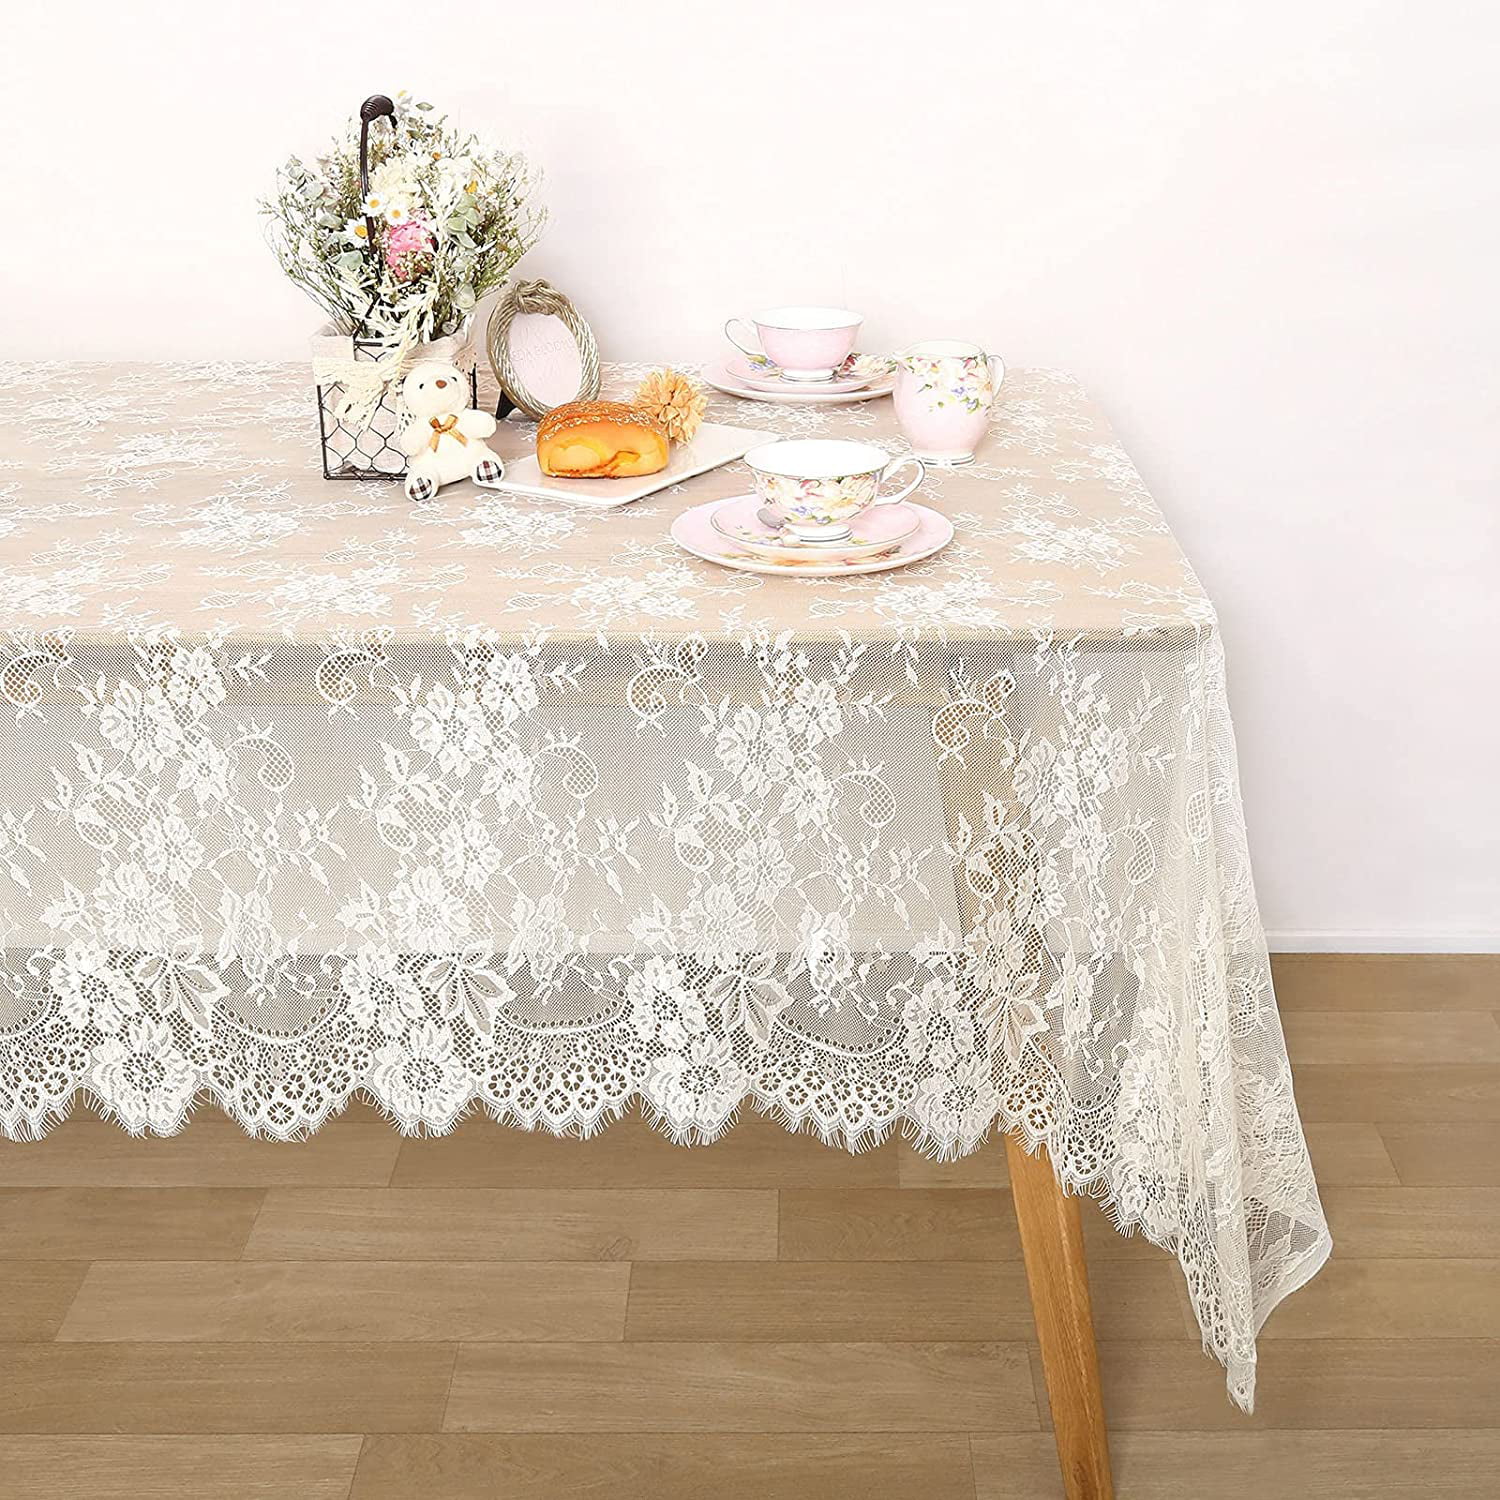 White Vintage Tablecloth Lace Table Cloth Doilies Wedding Valentines Day Decor 